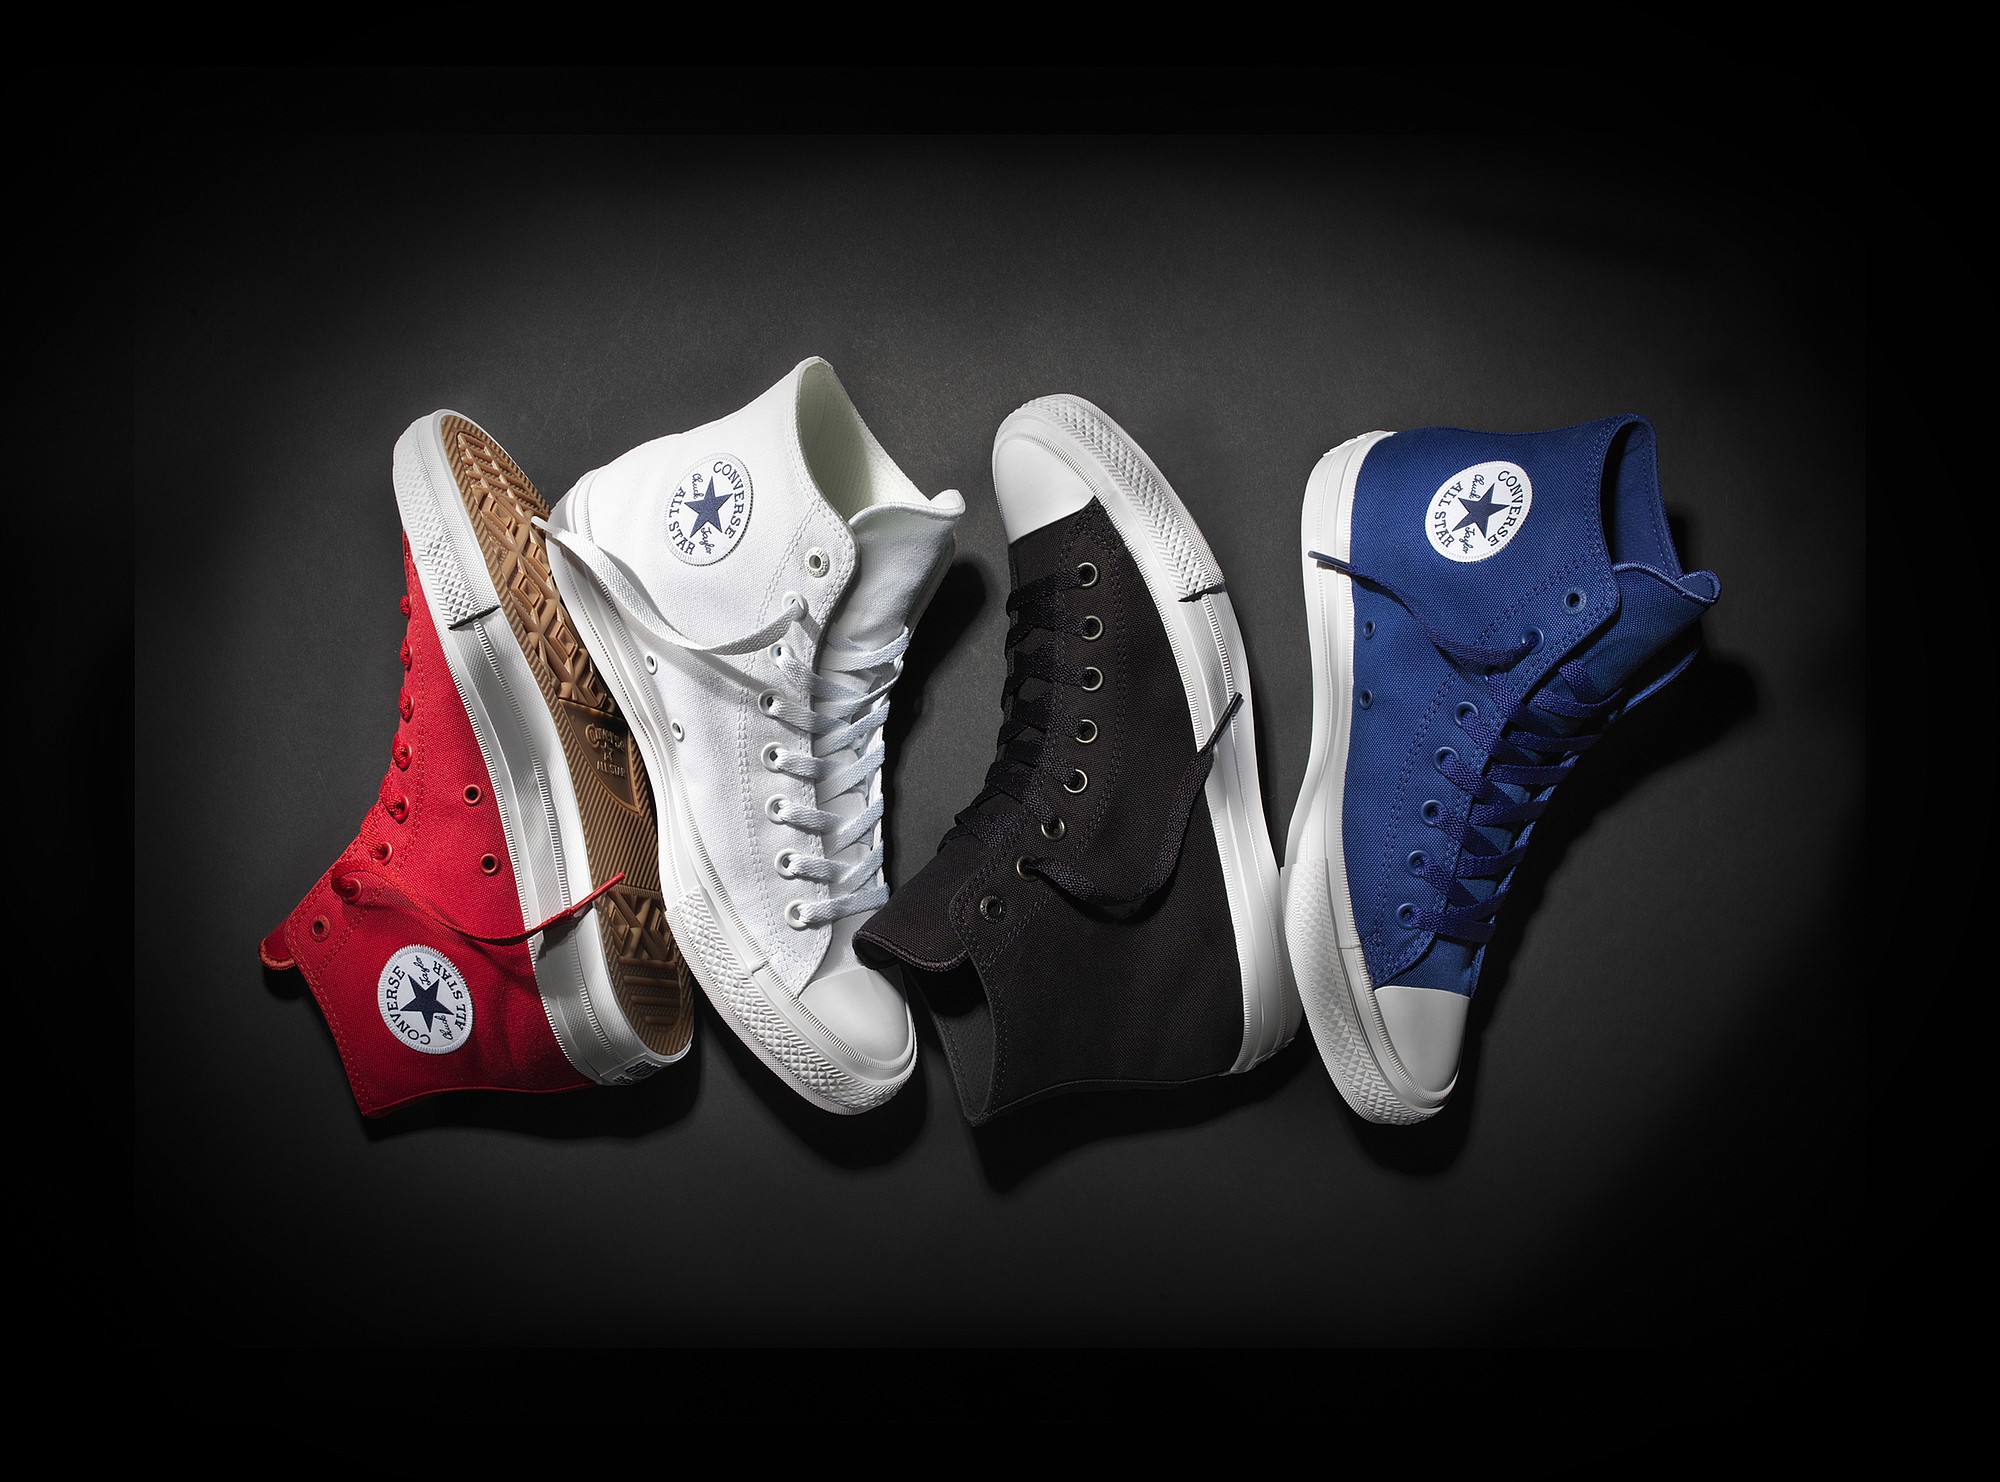 The new Chuck Taylors have a lot going on underneath the iconic look of the classic sneaker.